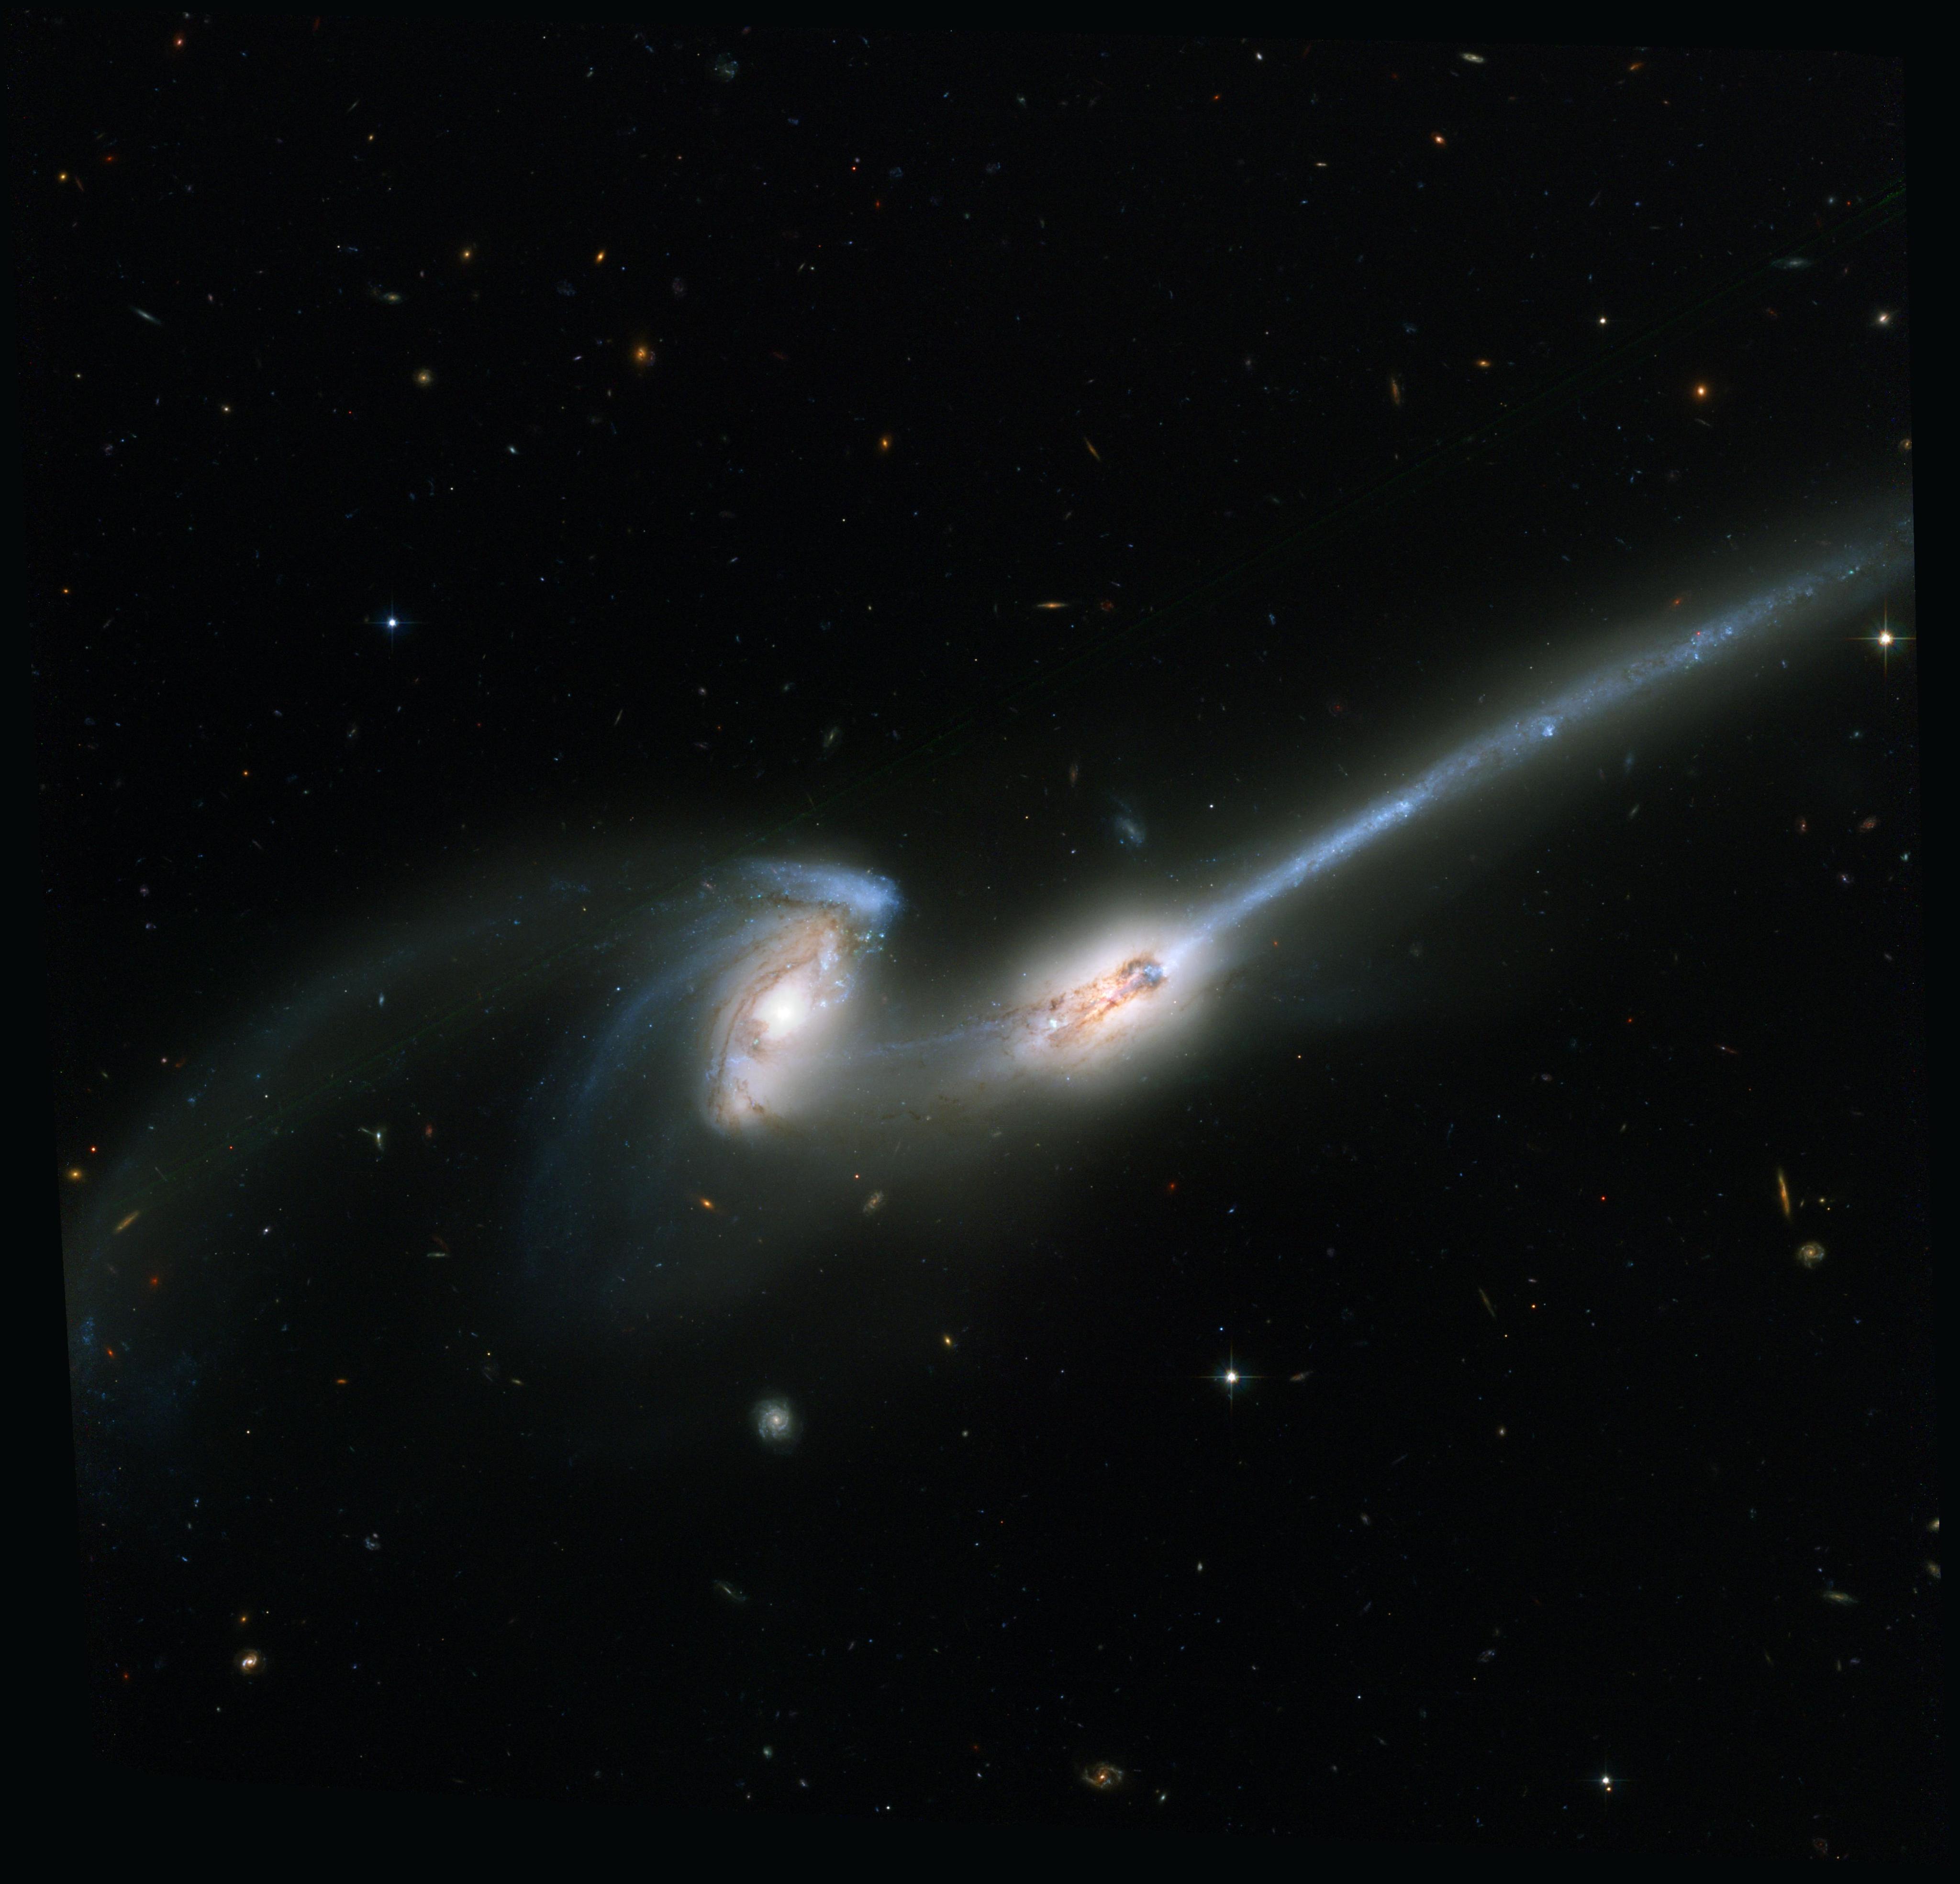 Two galaxies interacting that look like mice with tails.